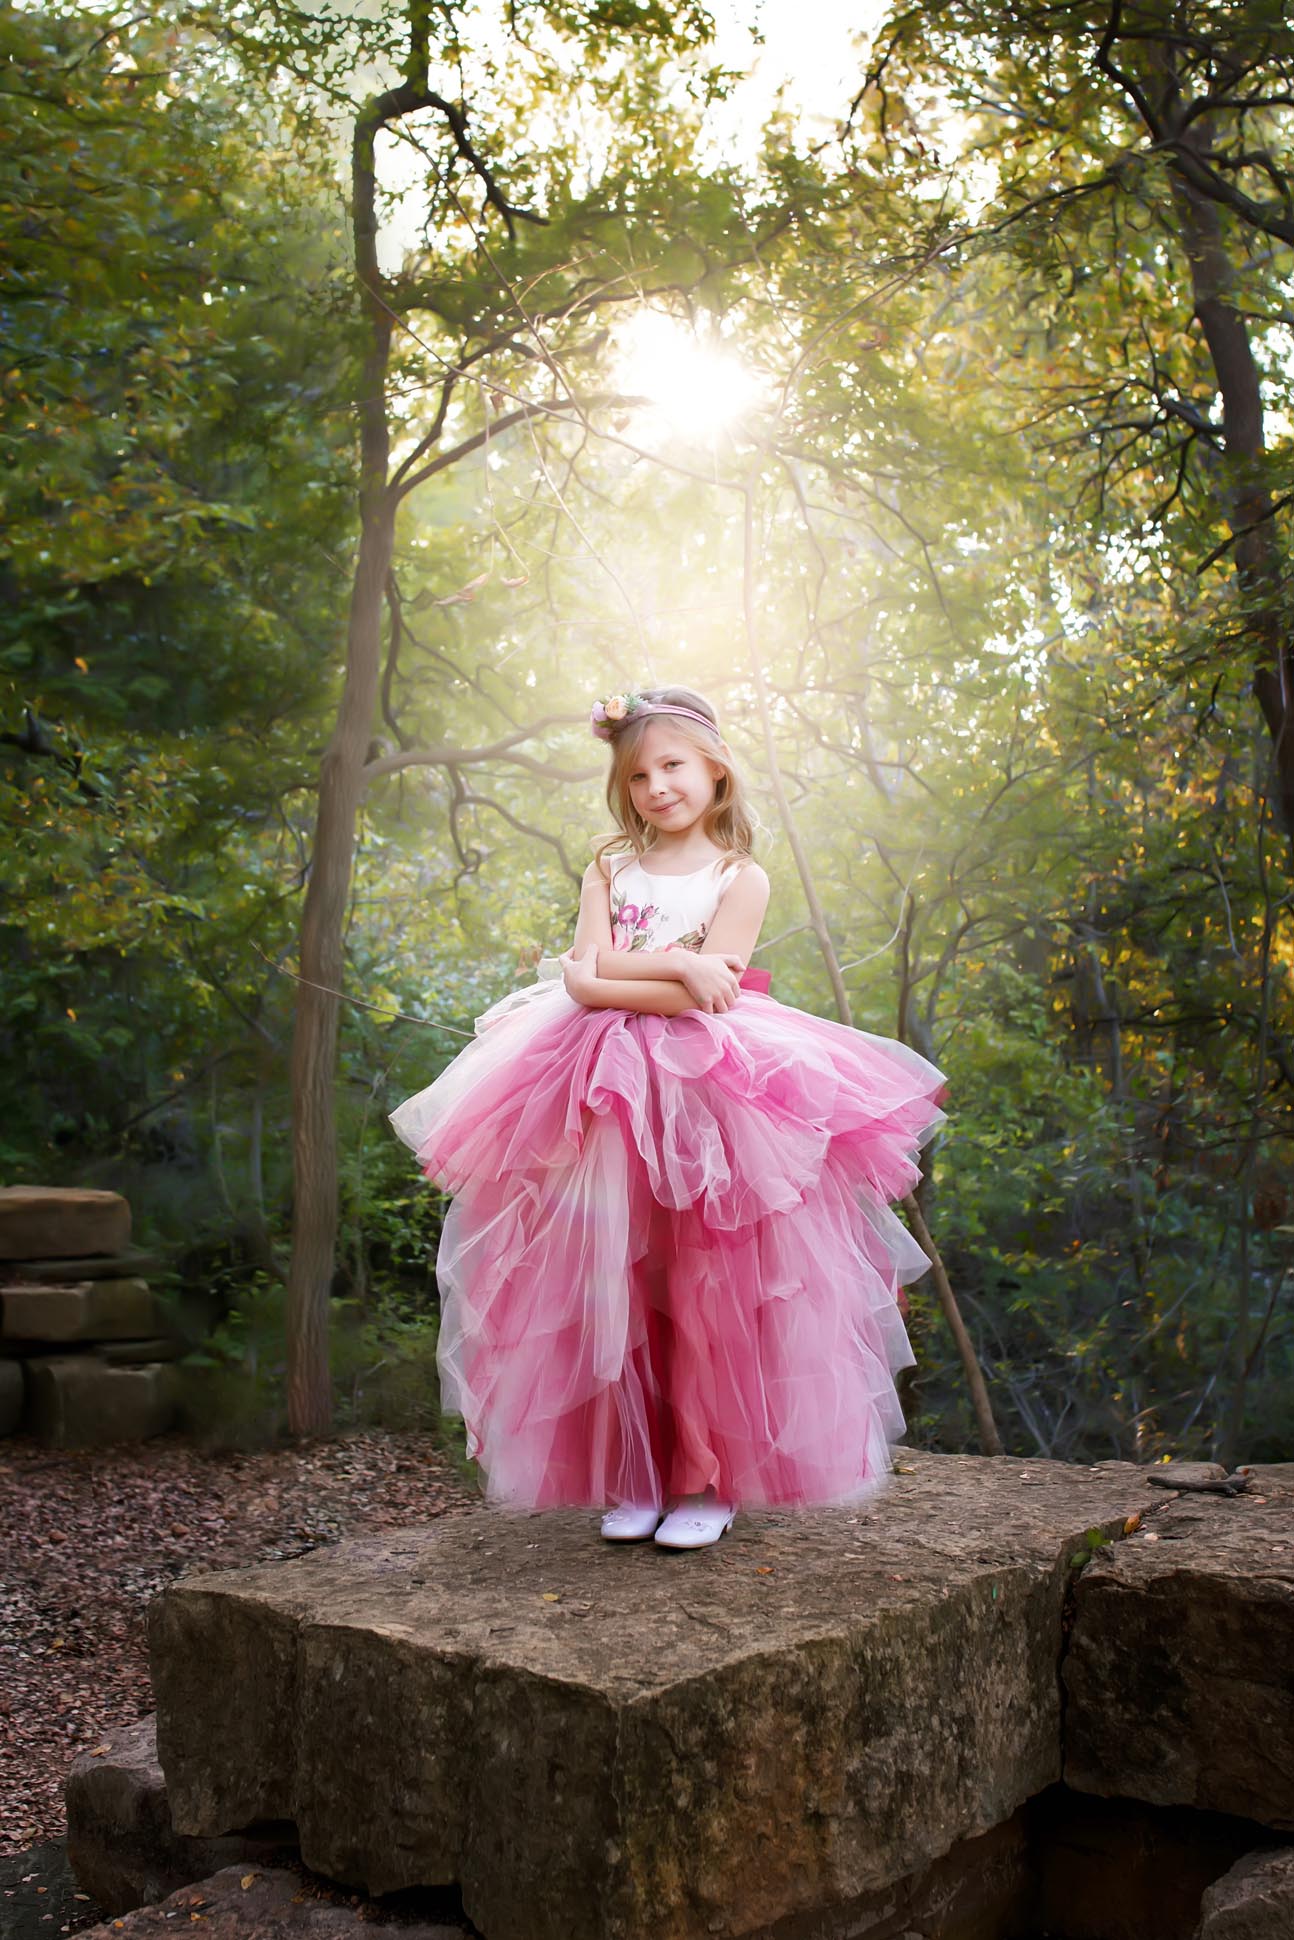 Dallas child photographer shares portrait of girl wearing pink tulle dress standing in a forest.